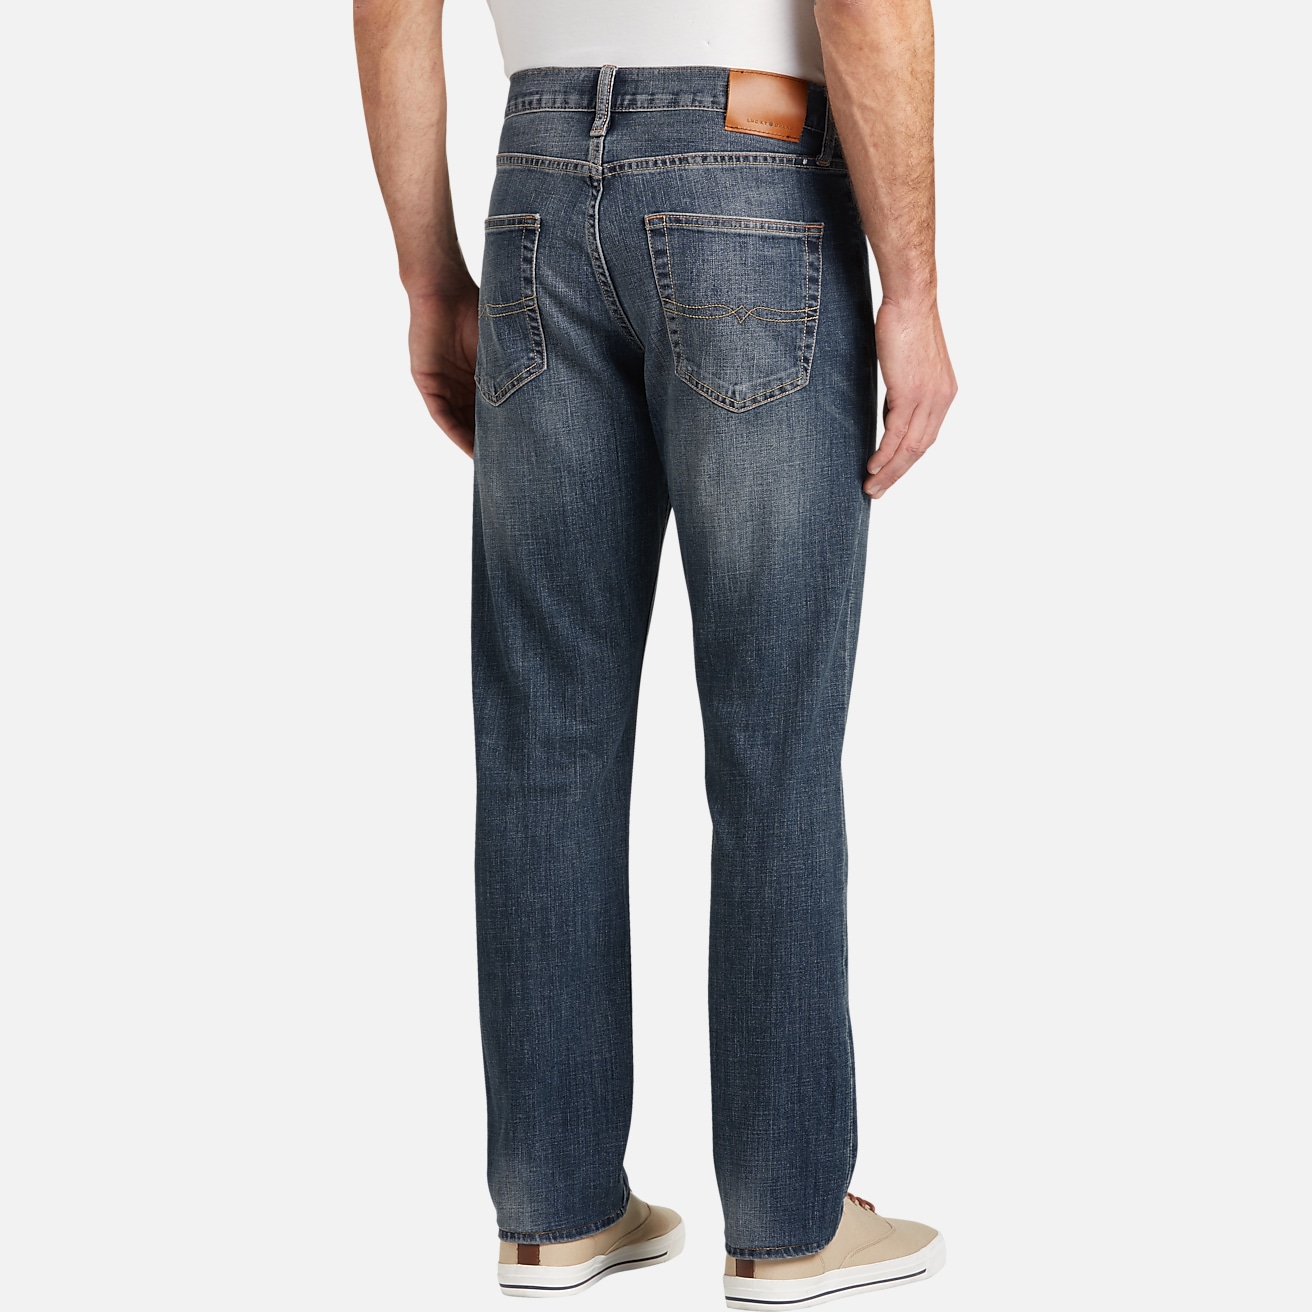 Lucky Brand 410 Arched Rock Athletic Fit Jeans, Best Sellers